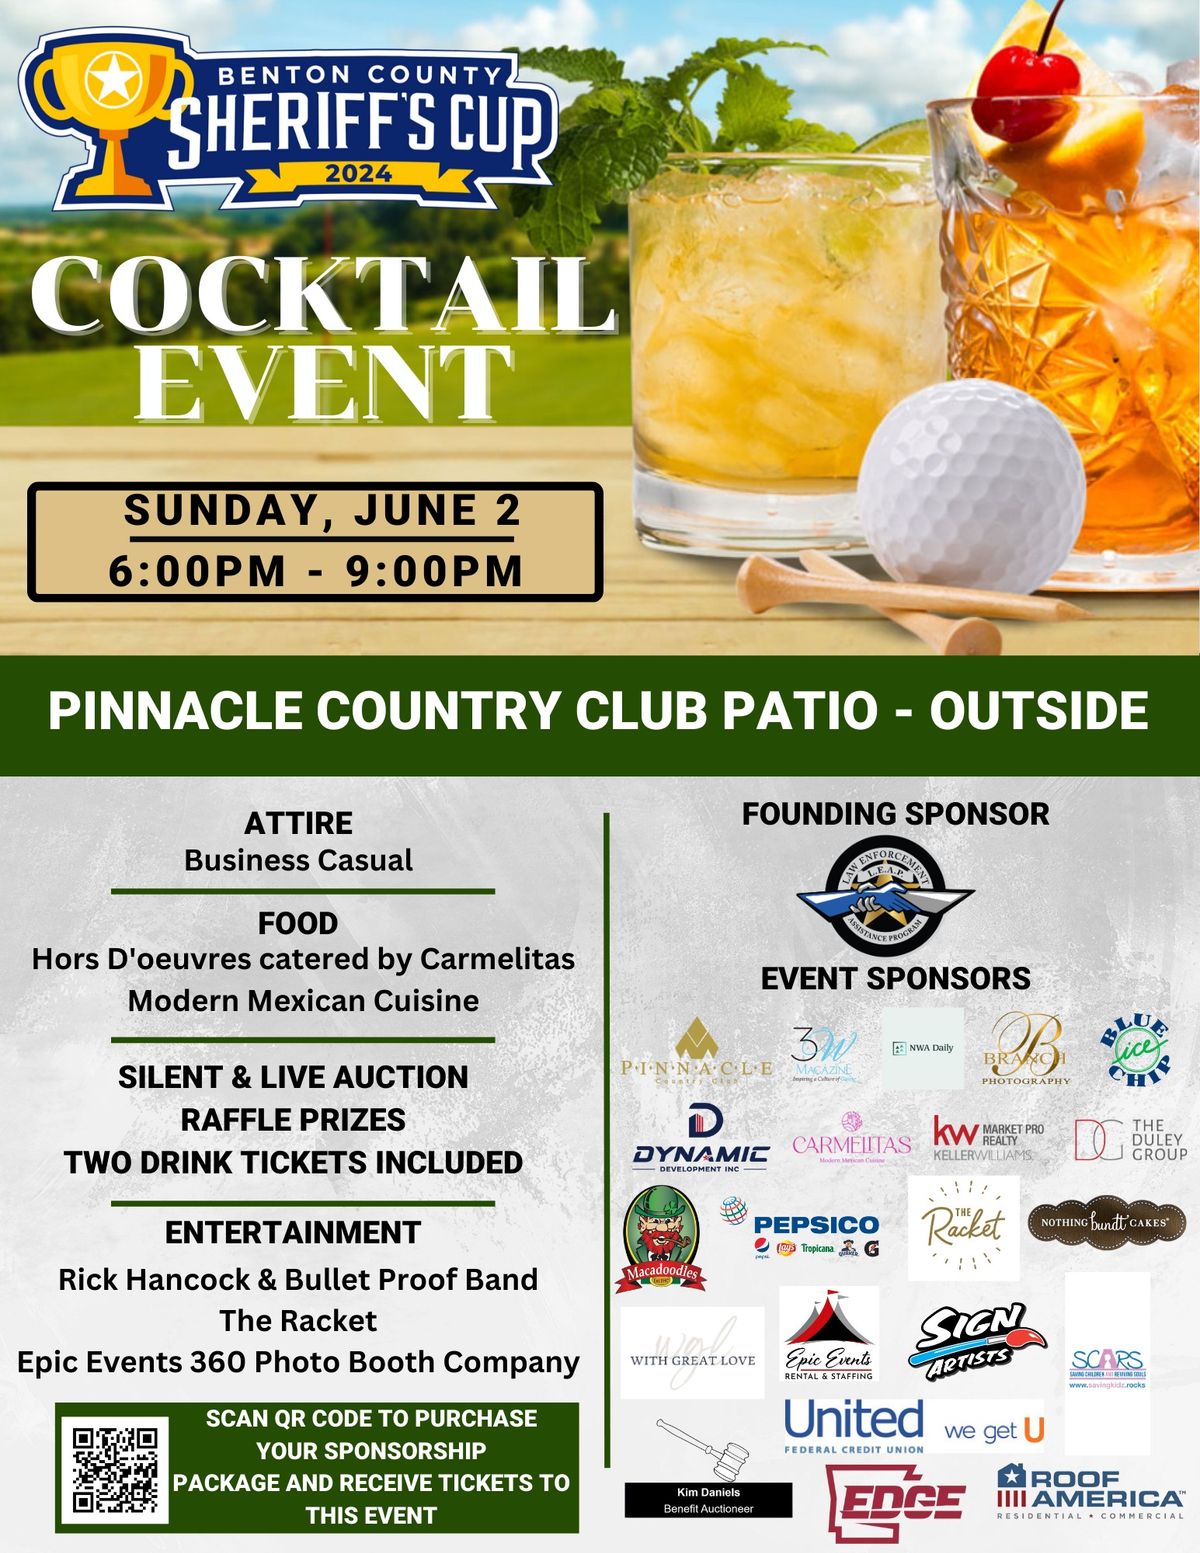 Benton County Sheriff's Cup Cocktail Event